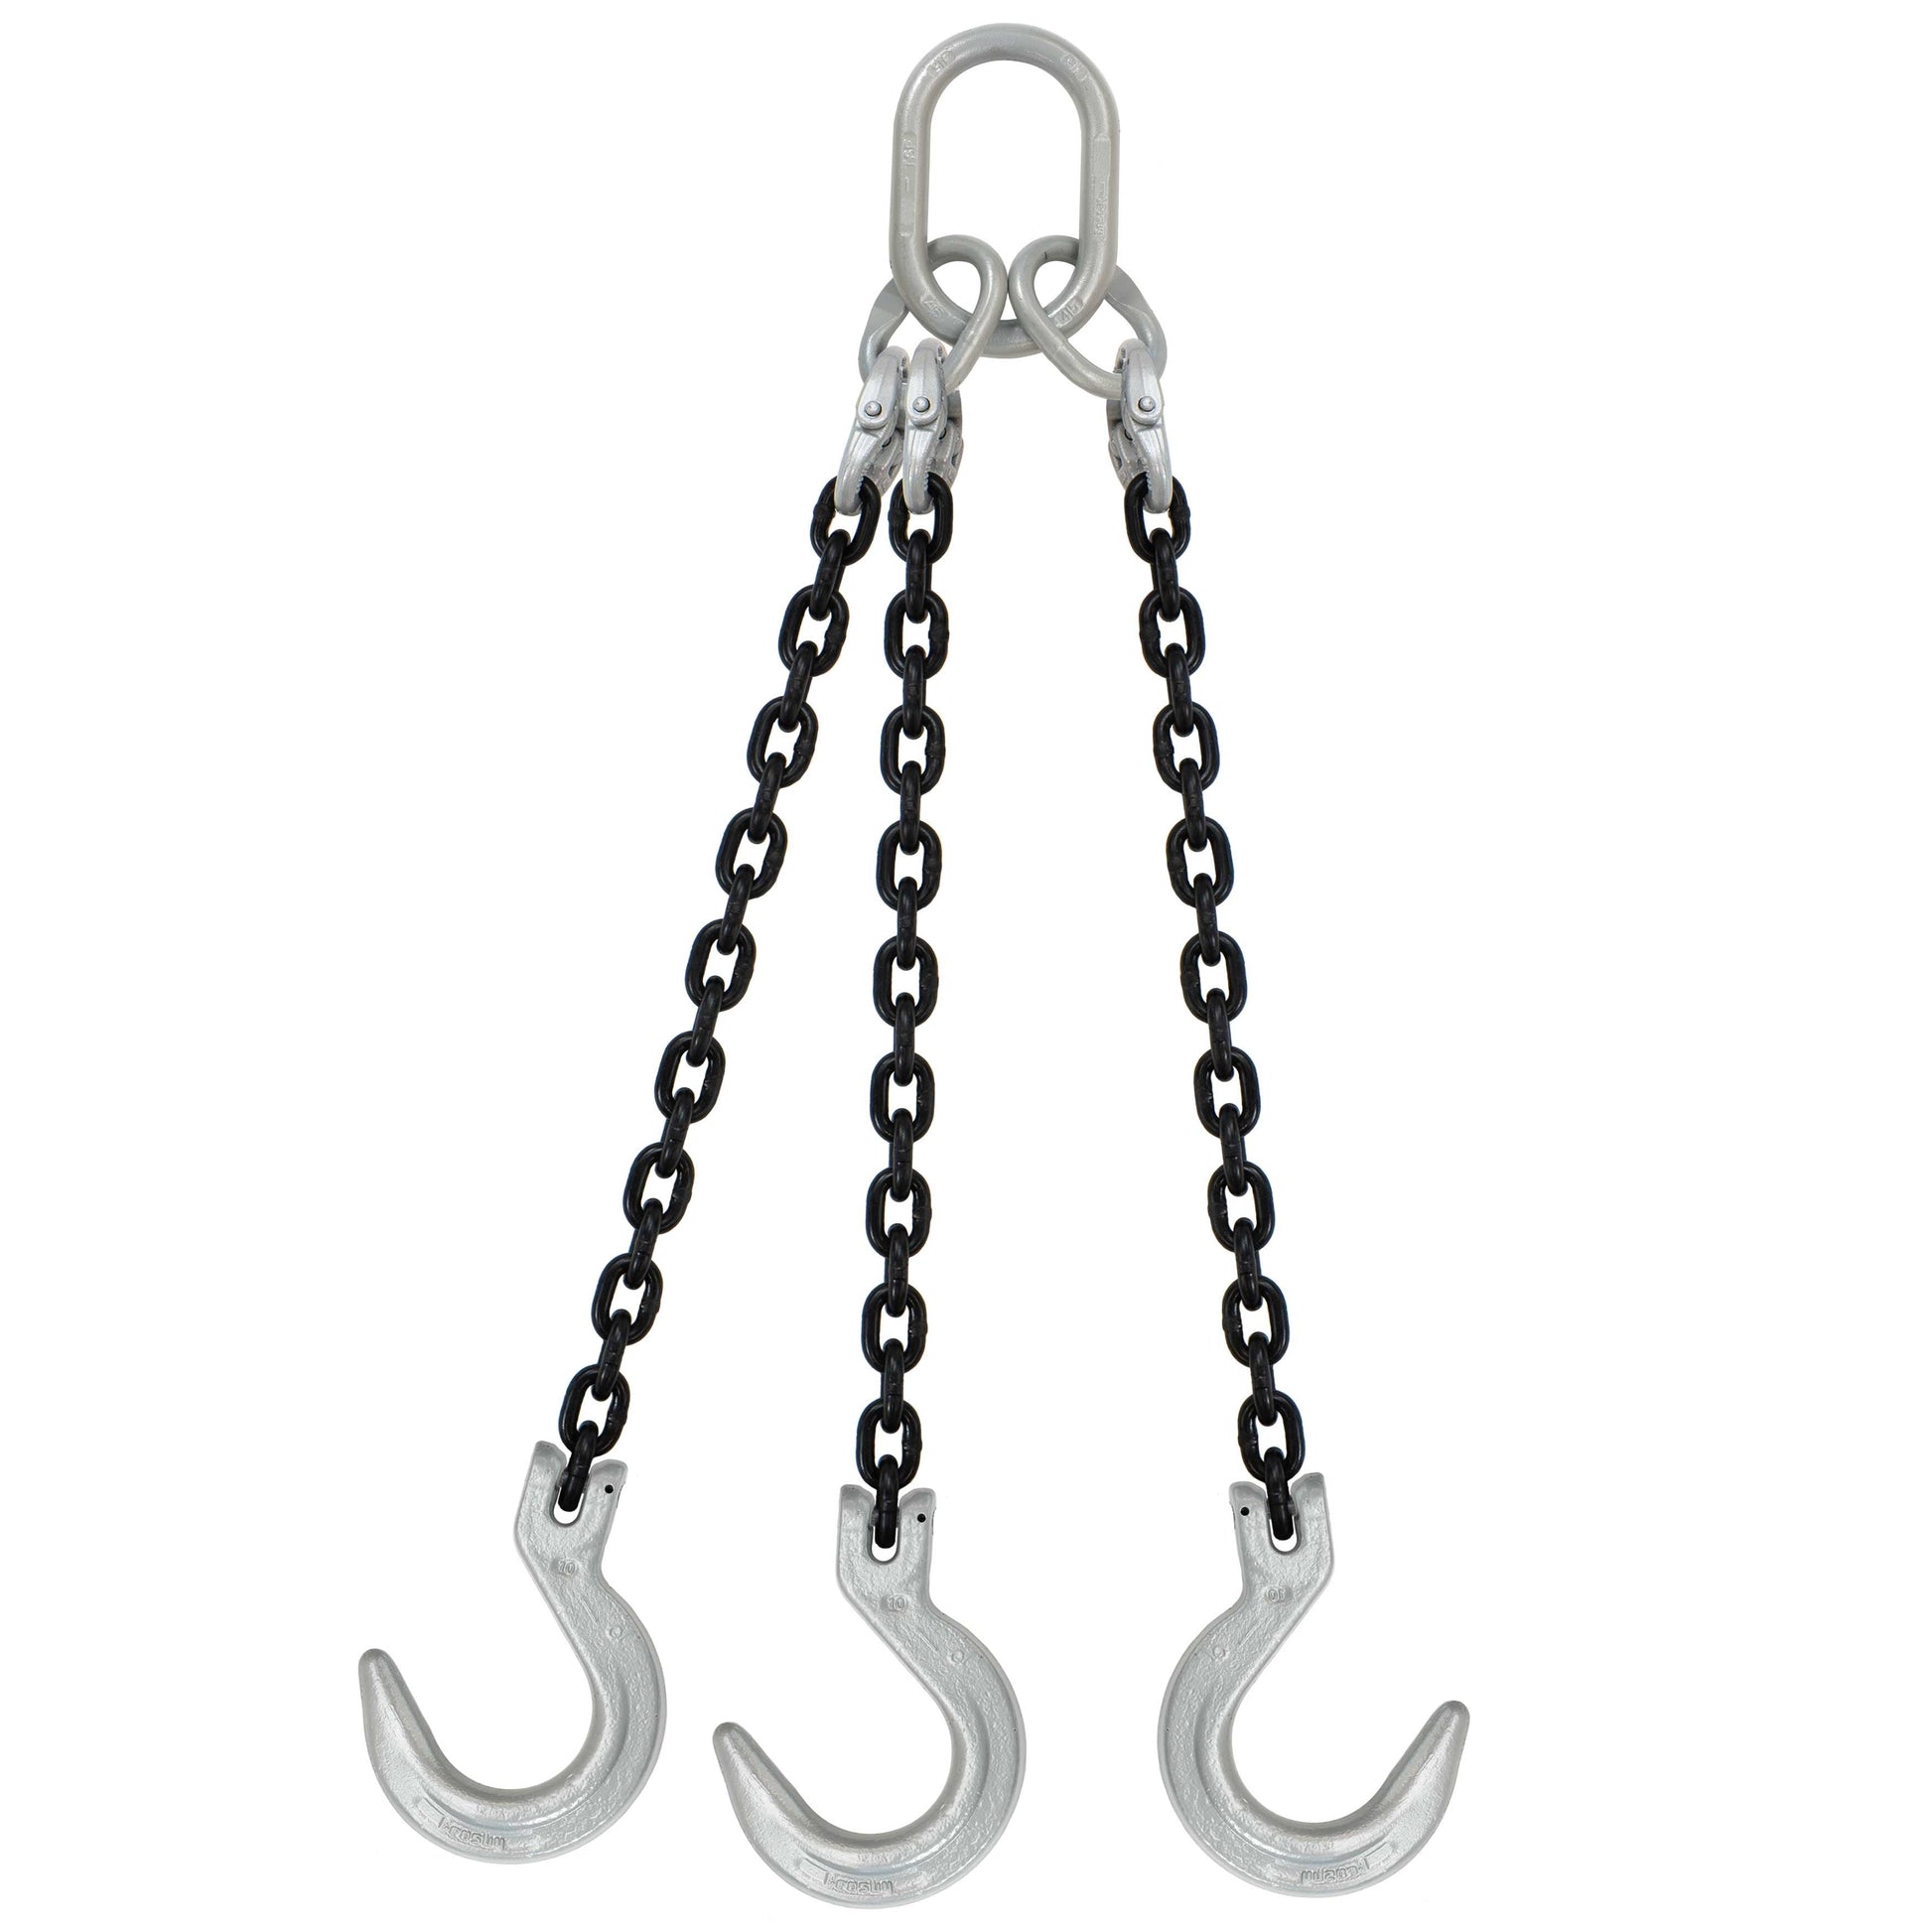 12 inch x 18 foot Domestic 3 Leg Chain Sling w Crosby Foundry Hooks Grade 100 image 1 of 2